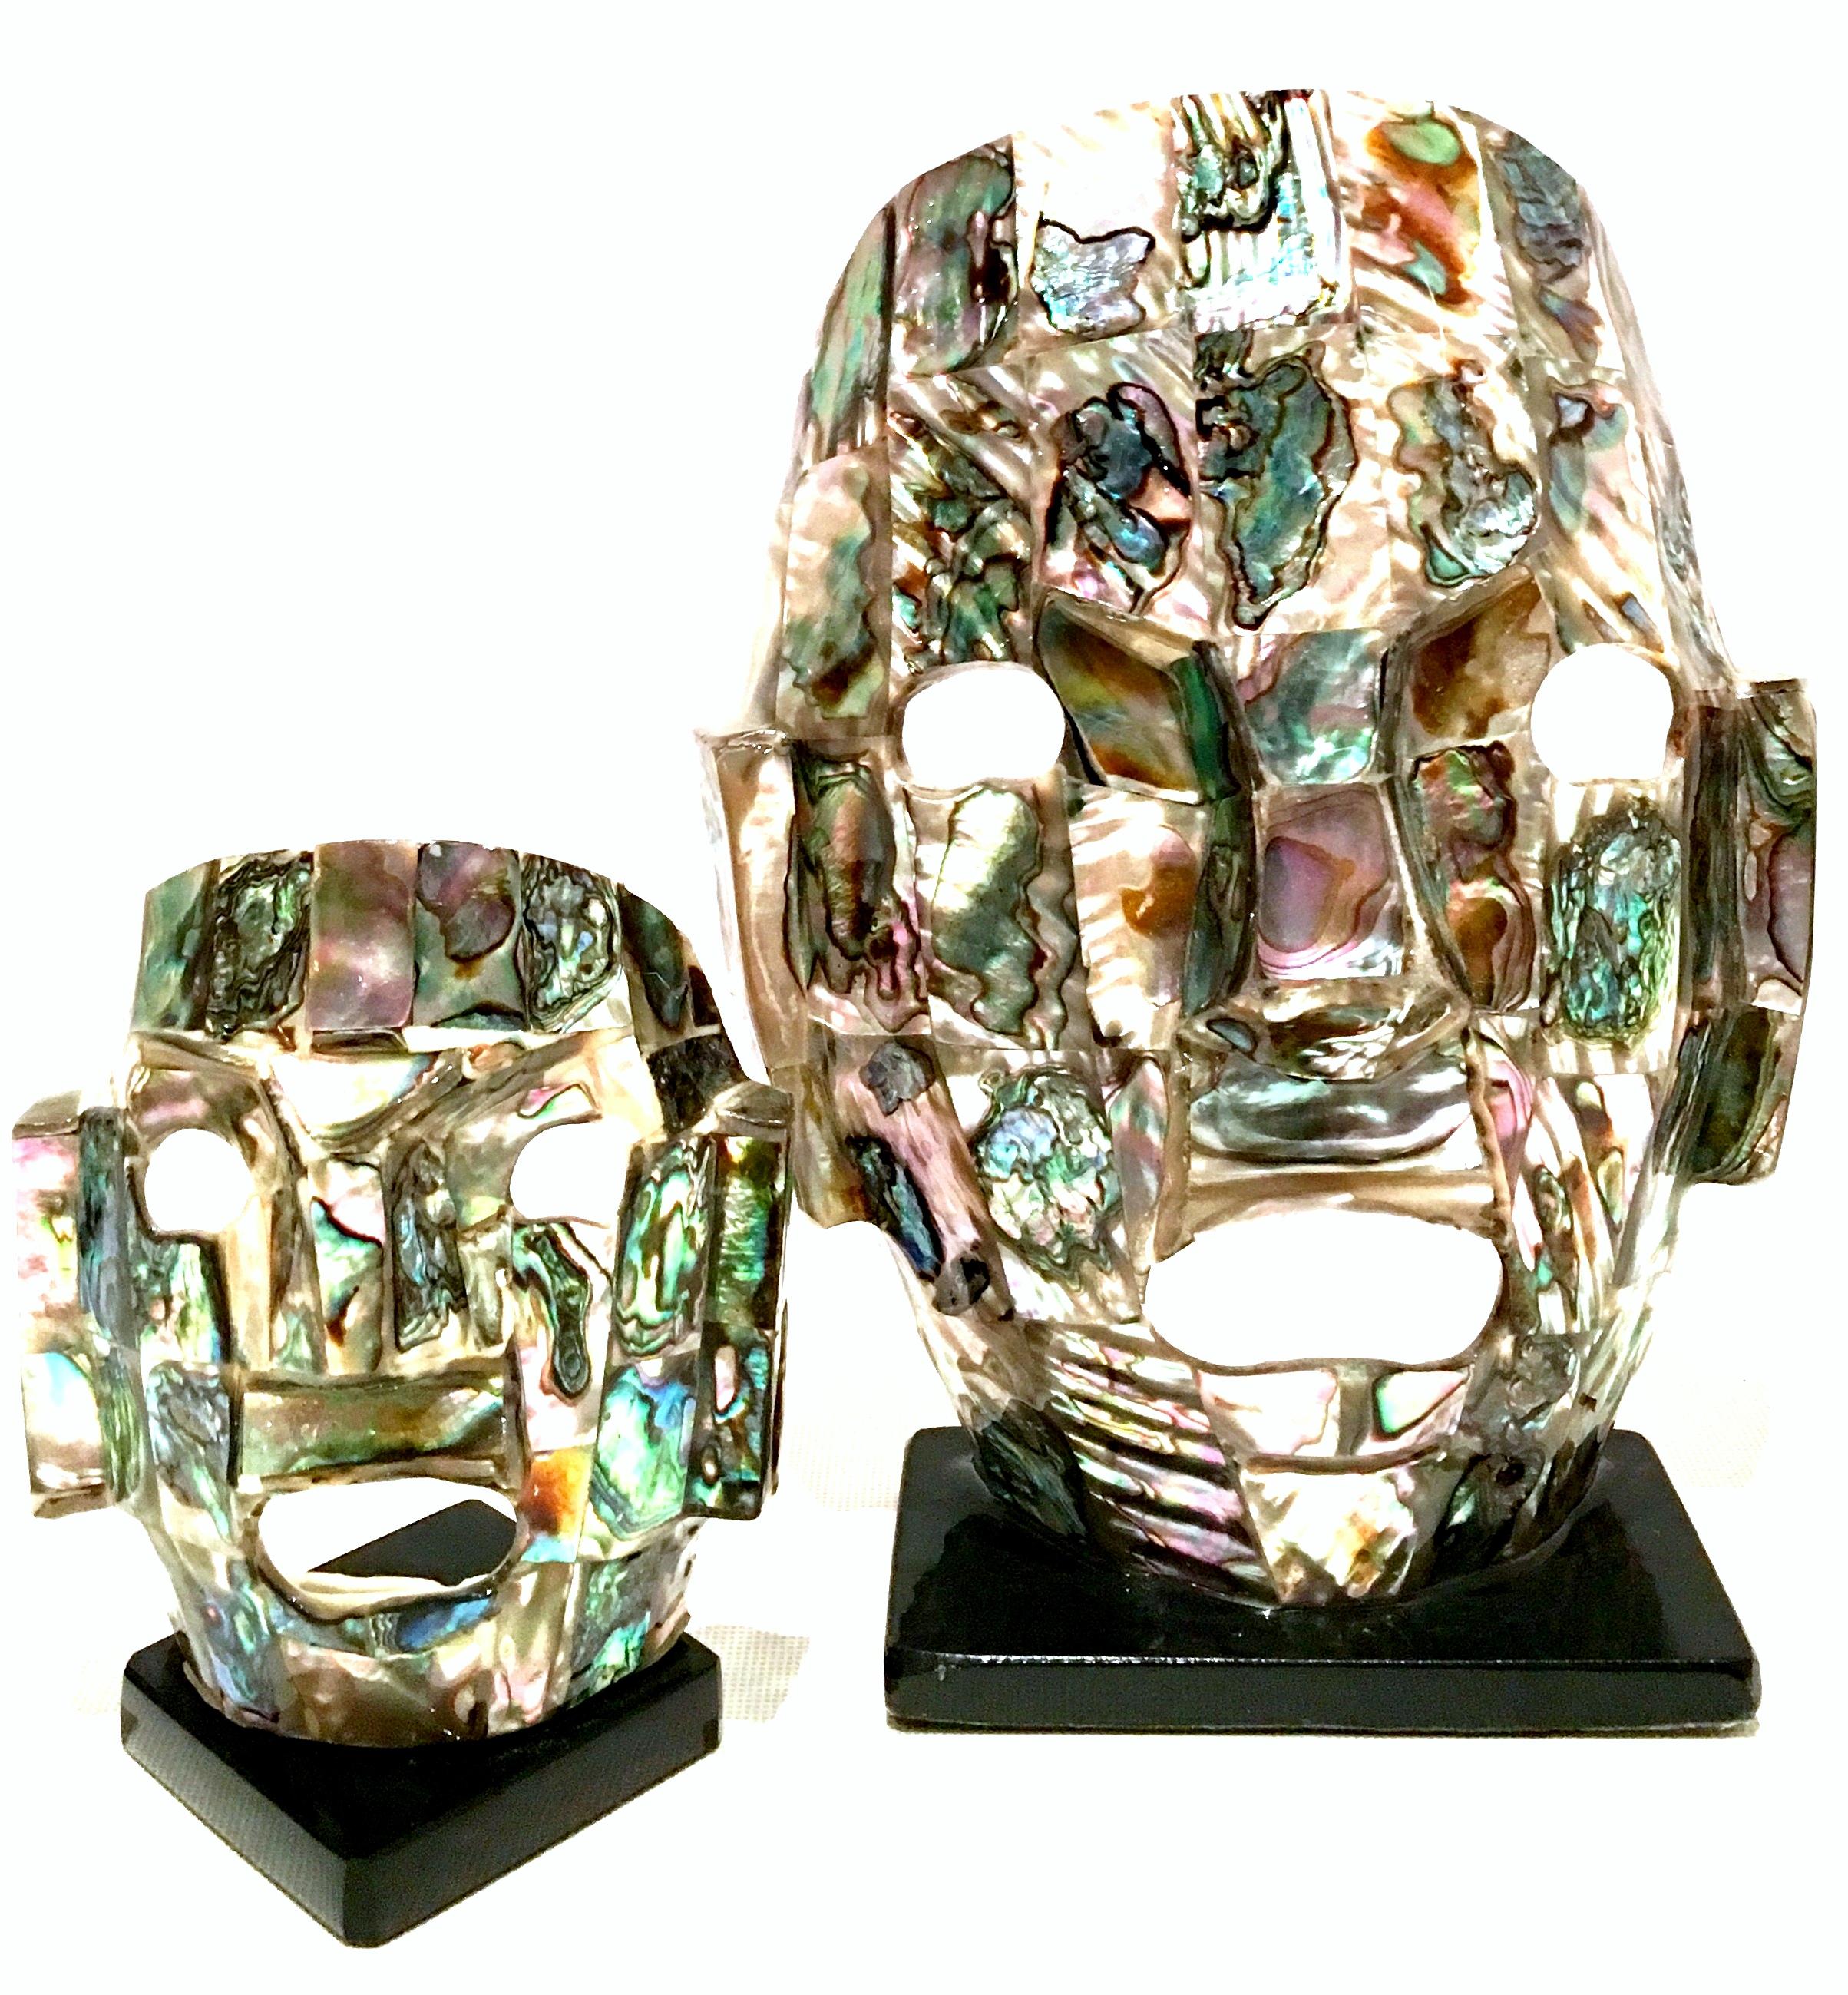 Mid-20th century Mayan style pair of mounted mosaic abalone shell ceremonial mask sculptures. This pair features two sizes. The smaller mask sculpture measures approximately, 4.25